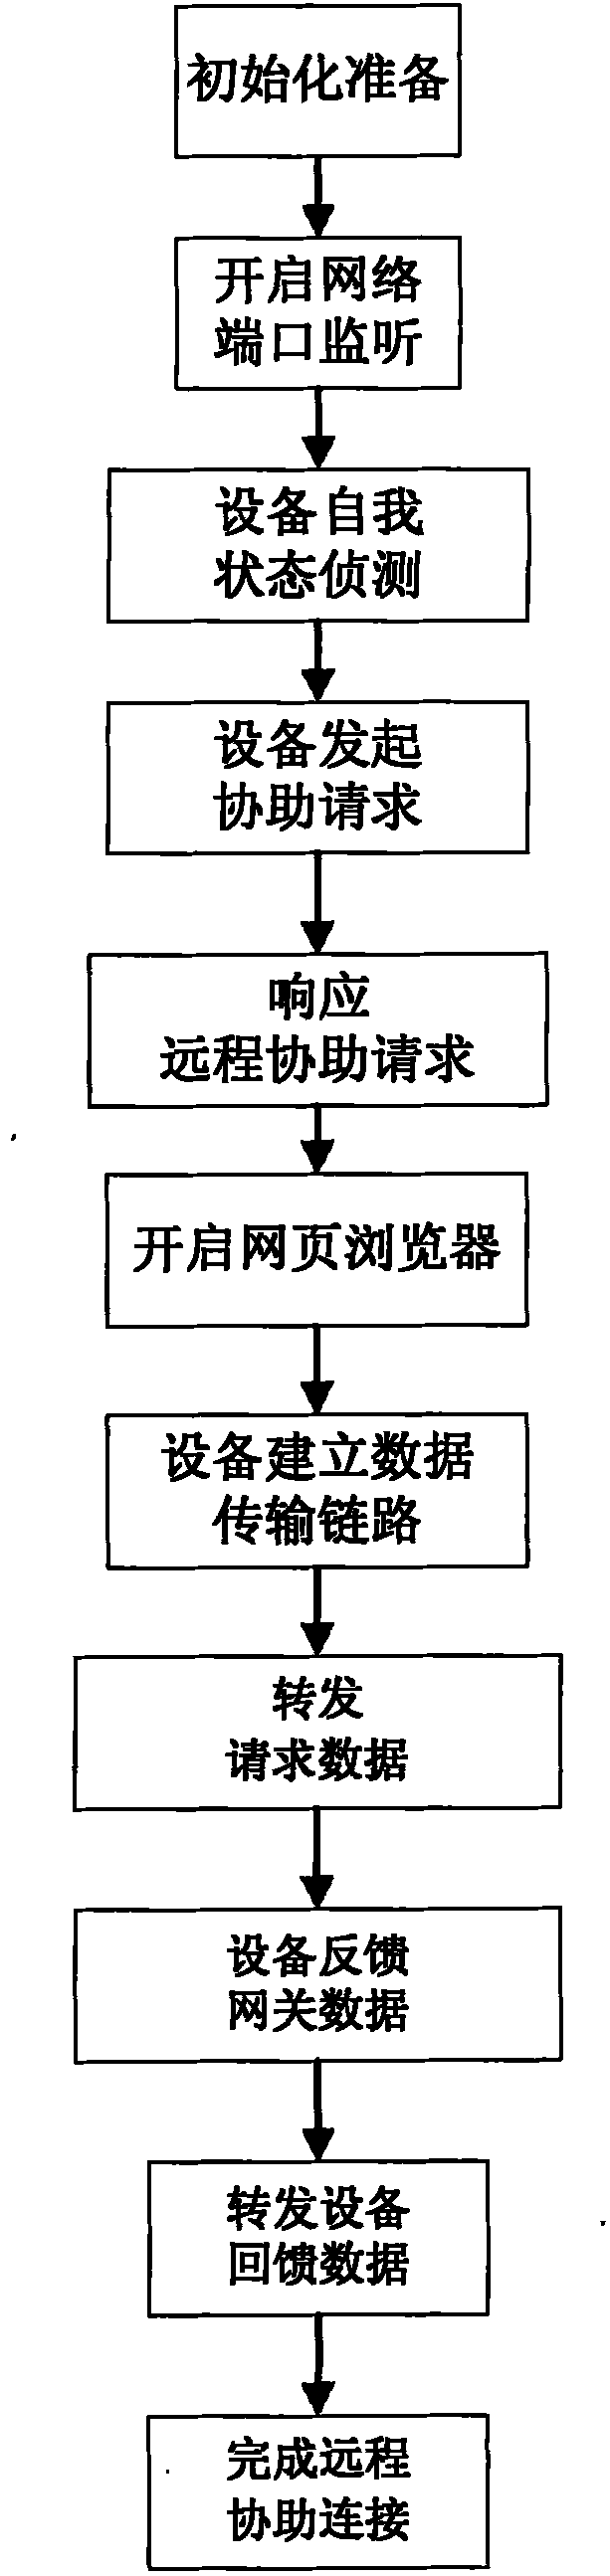 Remote assistance service method aiming at embedded operation system